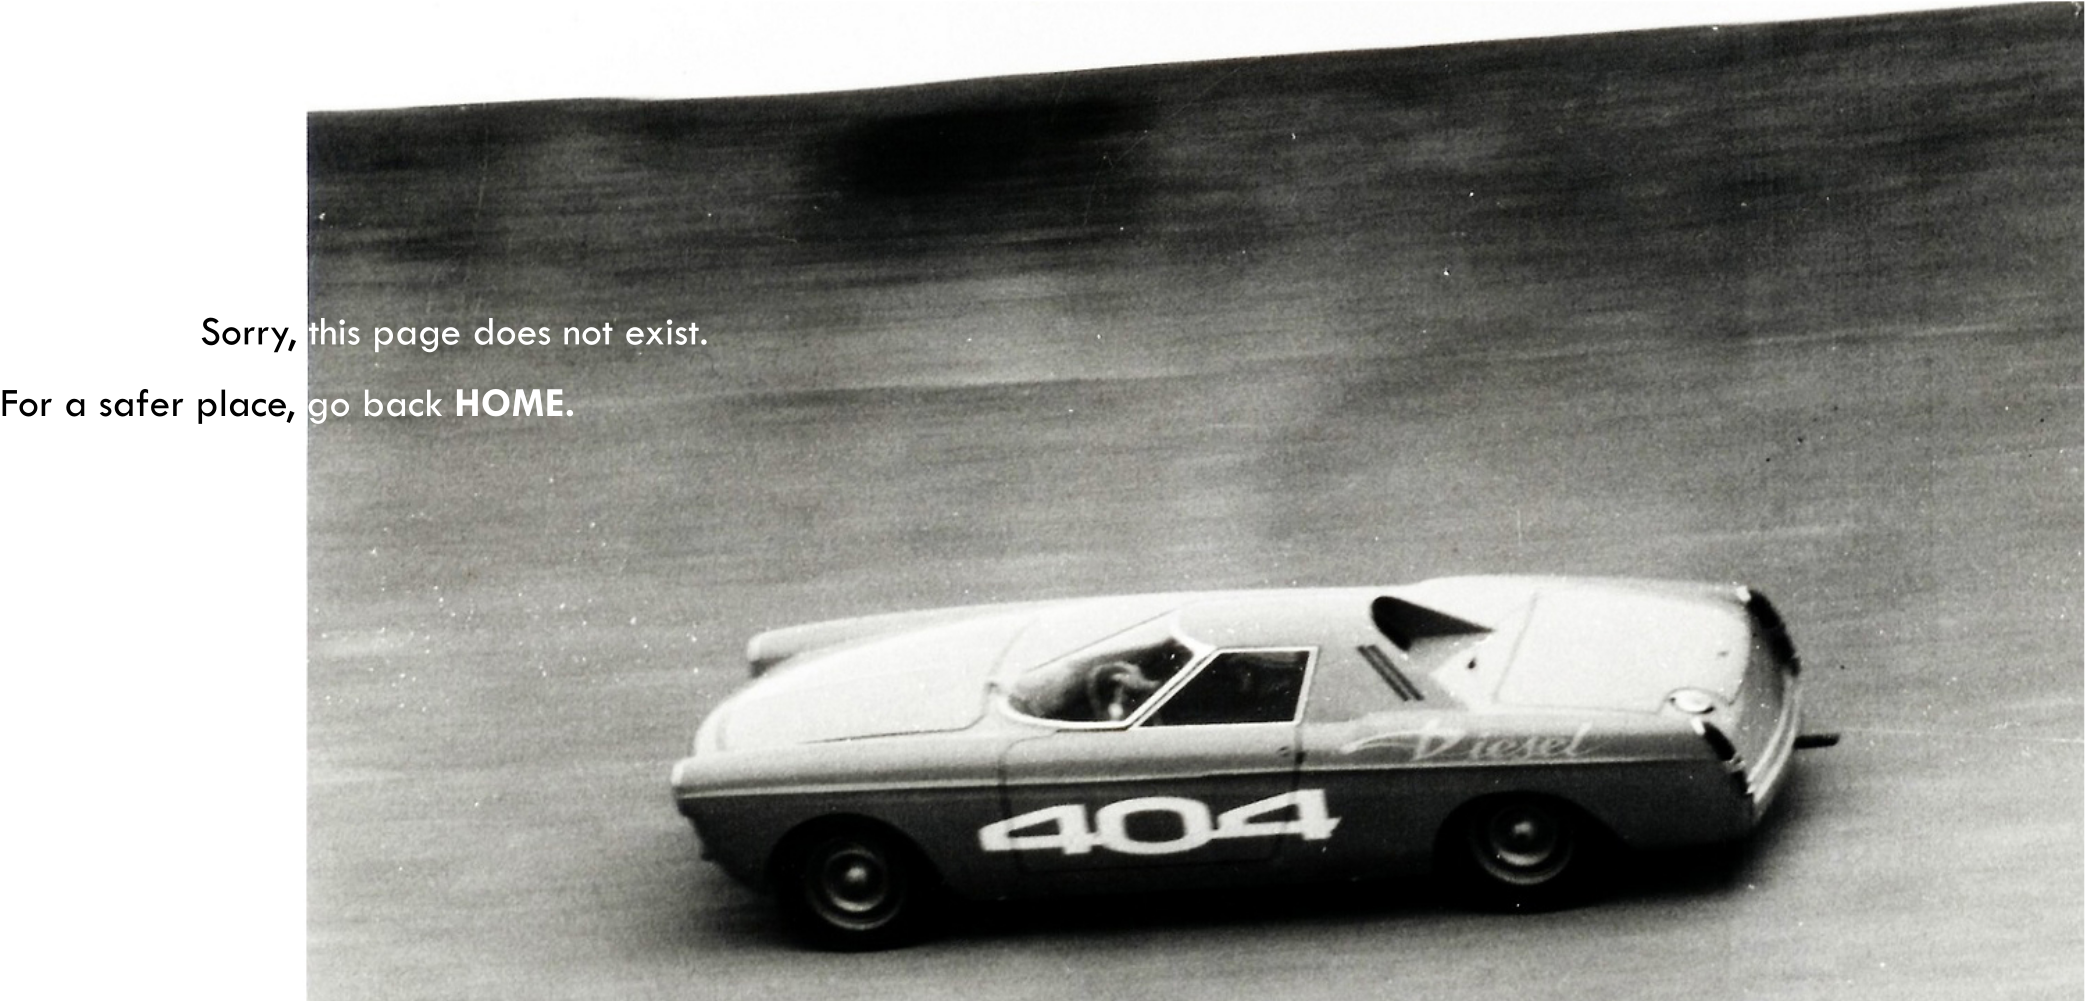 A picture of the legendary car, the 404 Peugeot